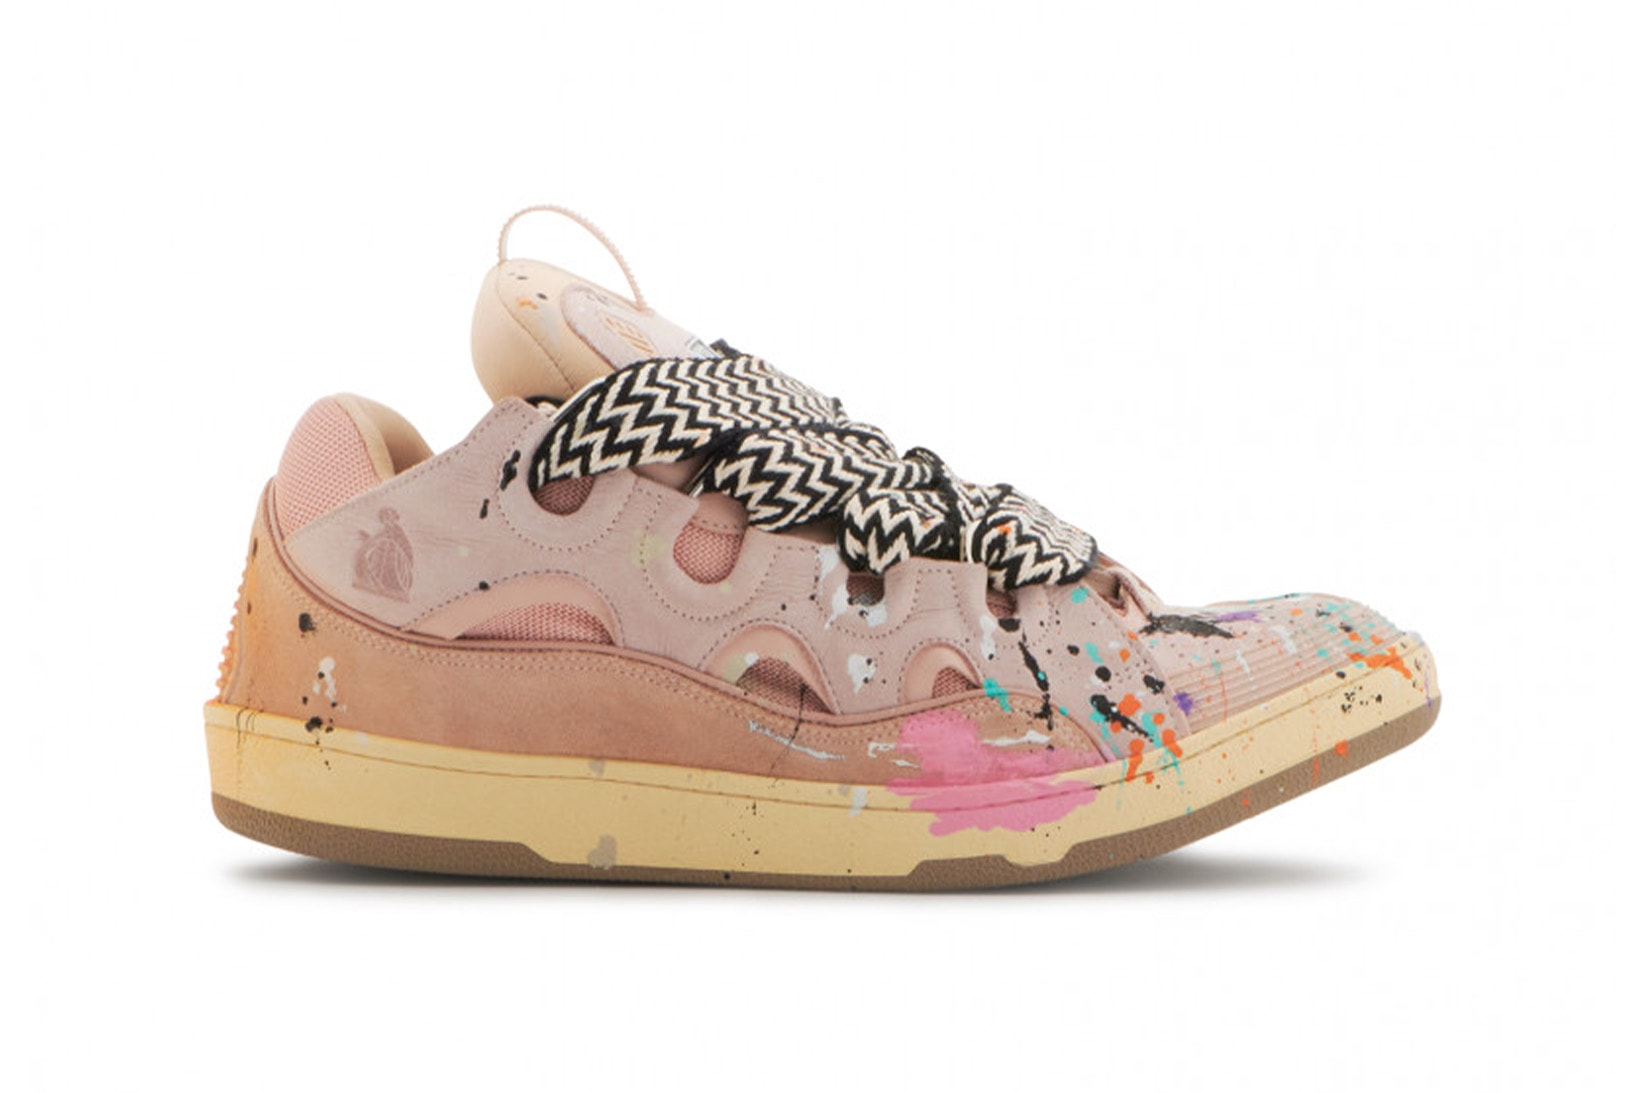 lanvin gallery dept collection sneakers release info pink